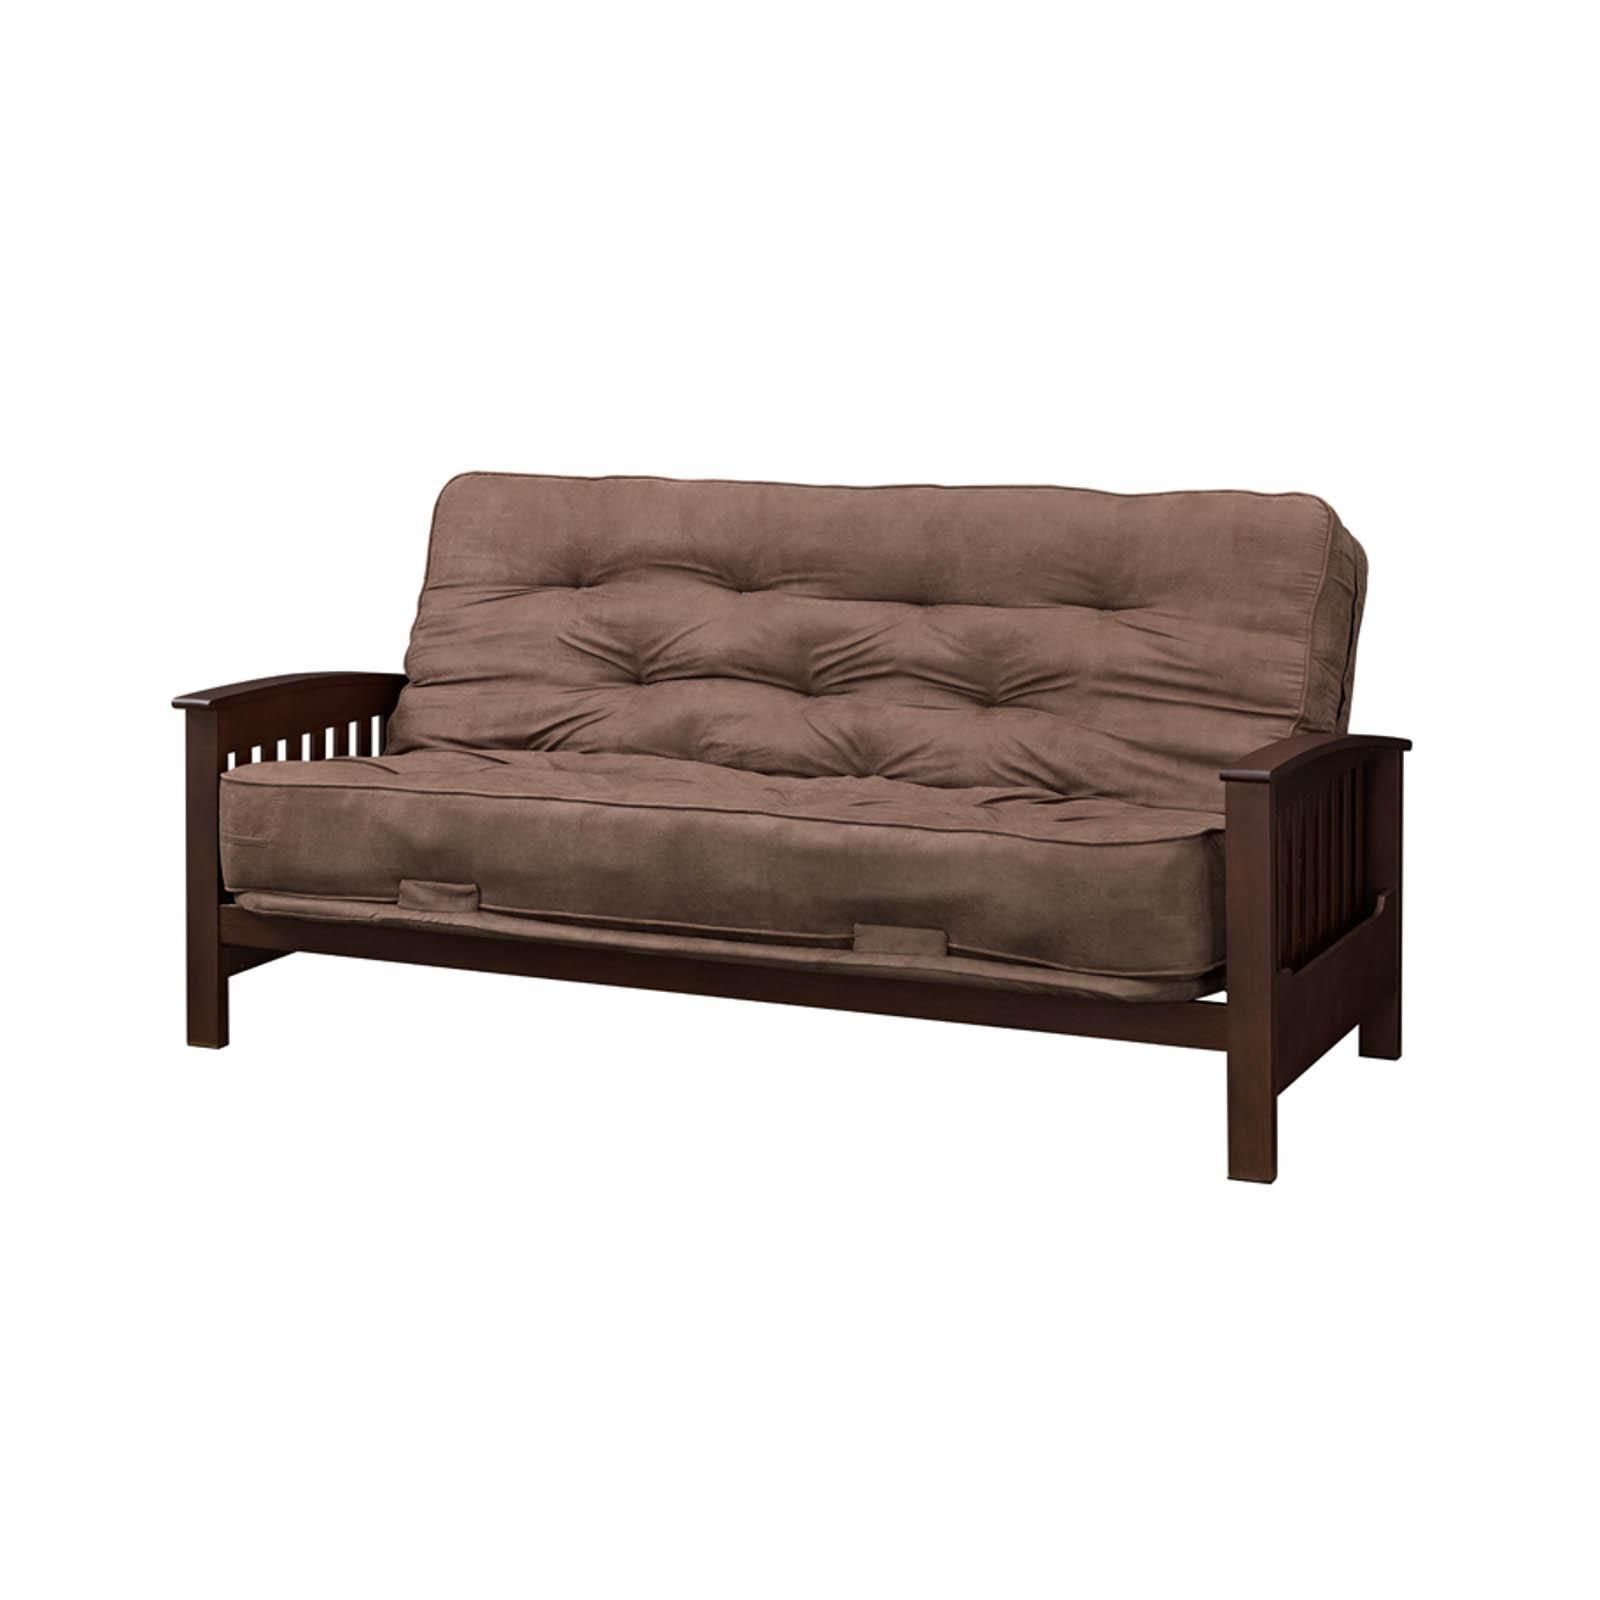 Furniture: Comfy Design Of Sears Sofa Bed For Lovely Home In Sears Sofa (View 14 of 20)